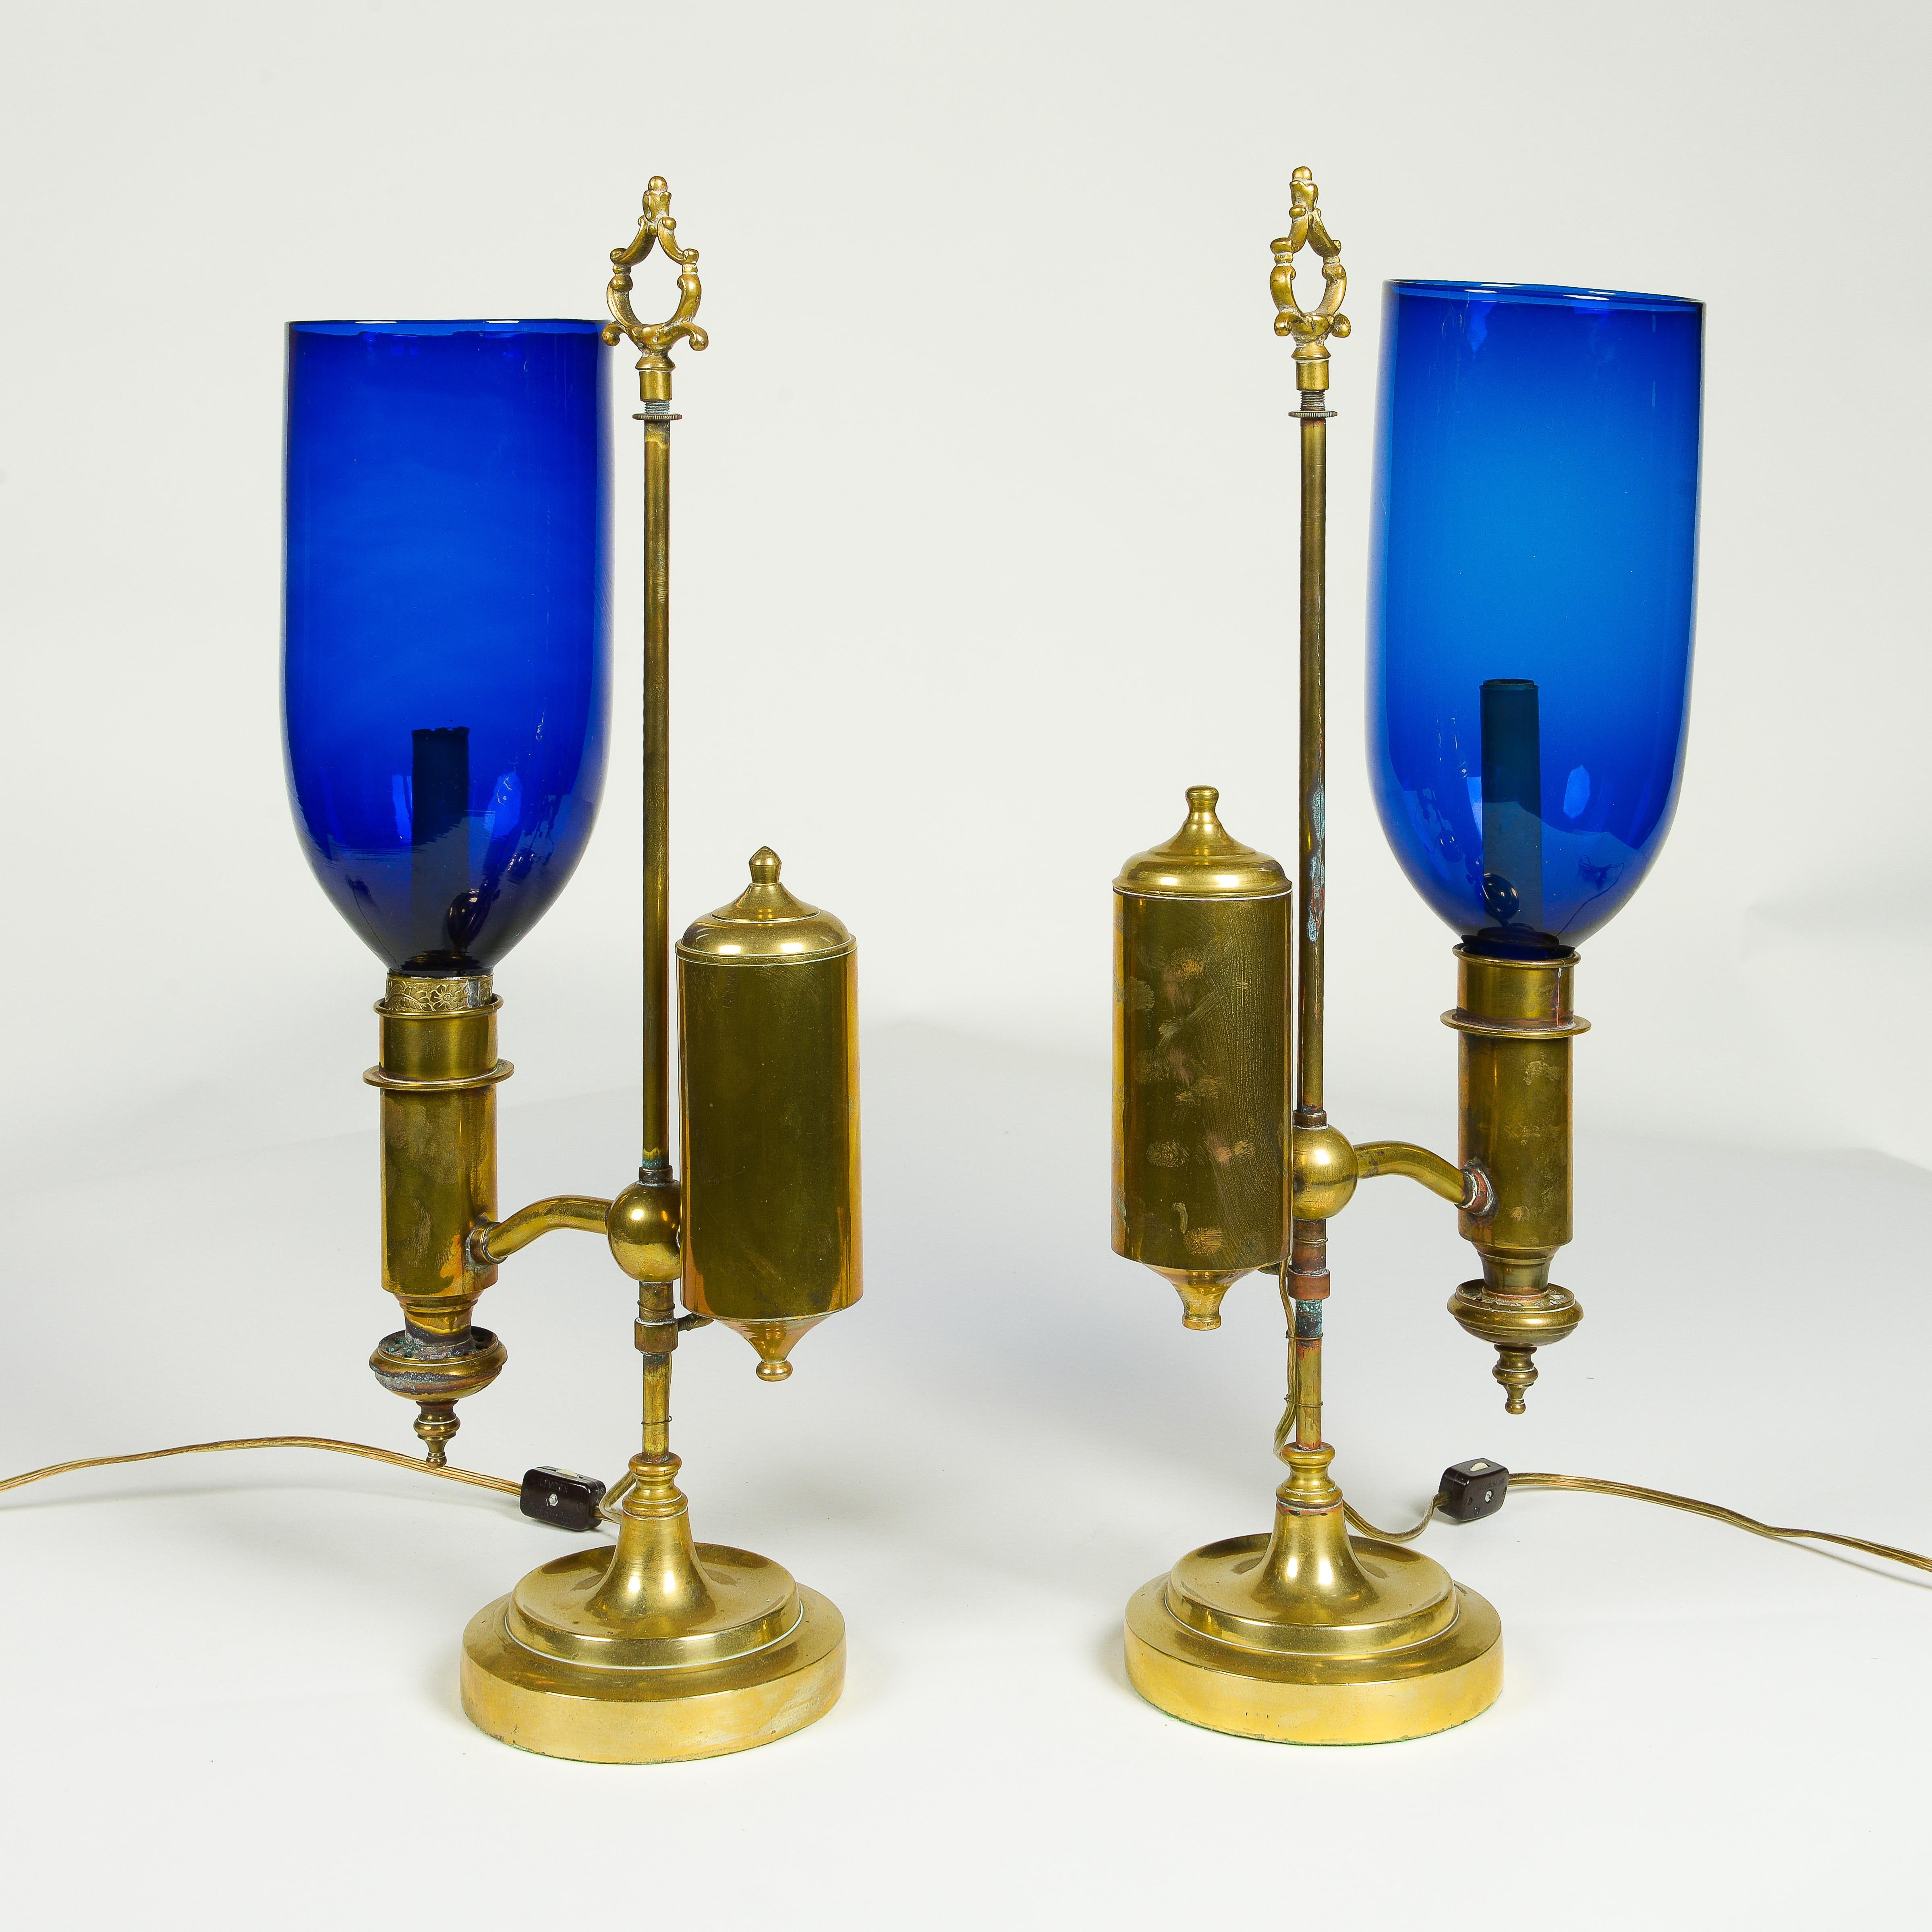 Each oil lamp later covered to electric; fitted with an adjustable arm issuing one light with later, removable blue hurricane shade; surmounted by a removable finial in the form of an open scrollwork clasp.